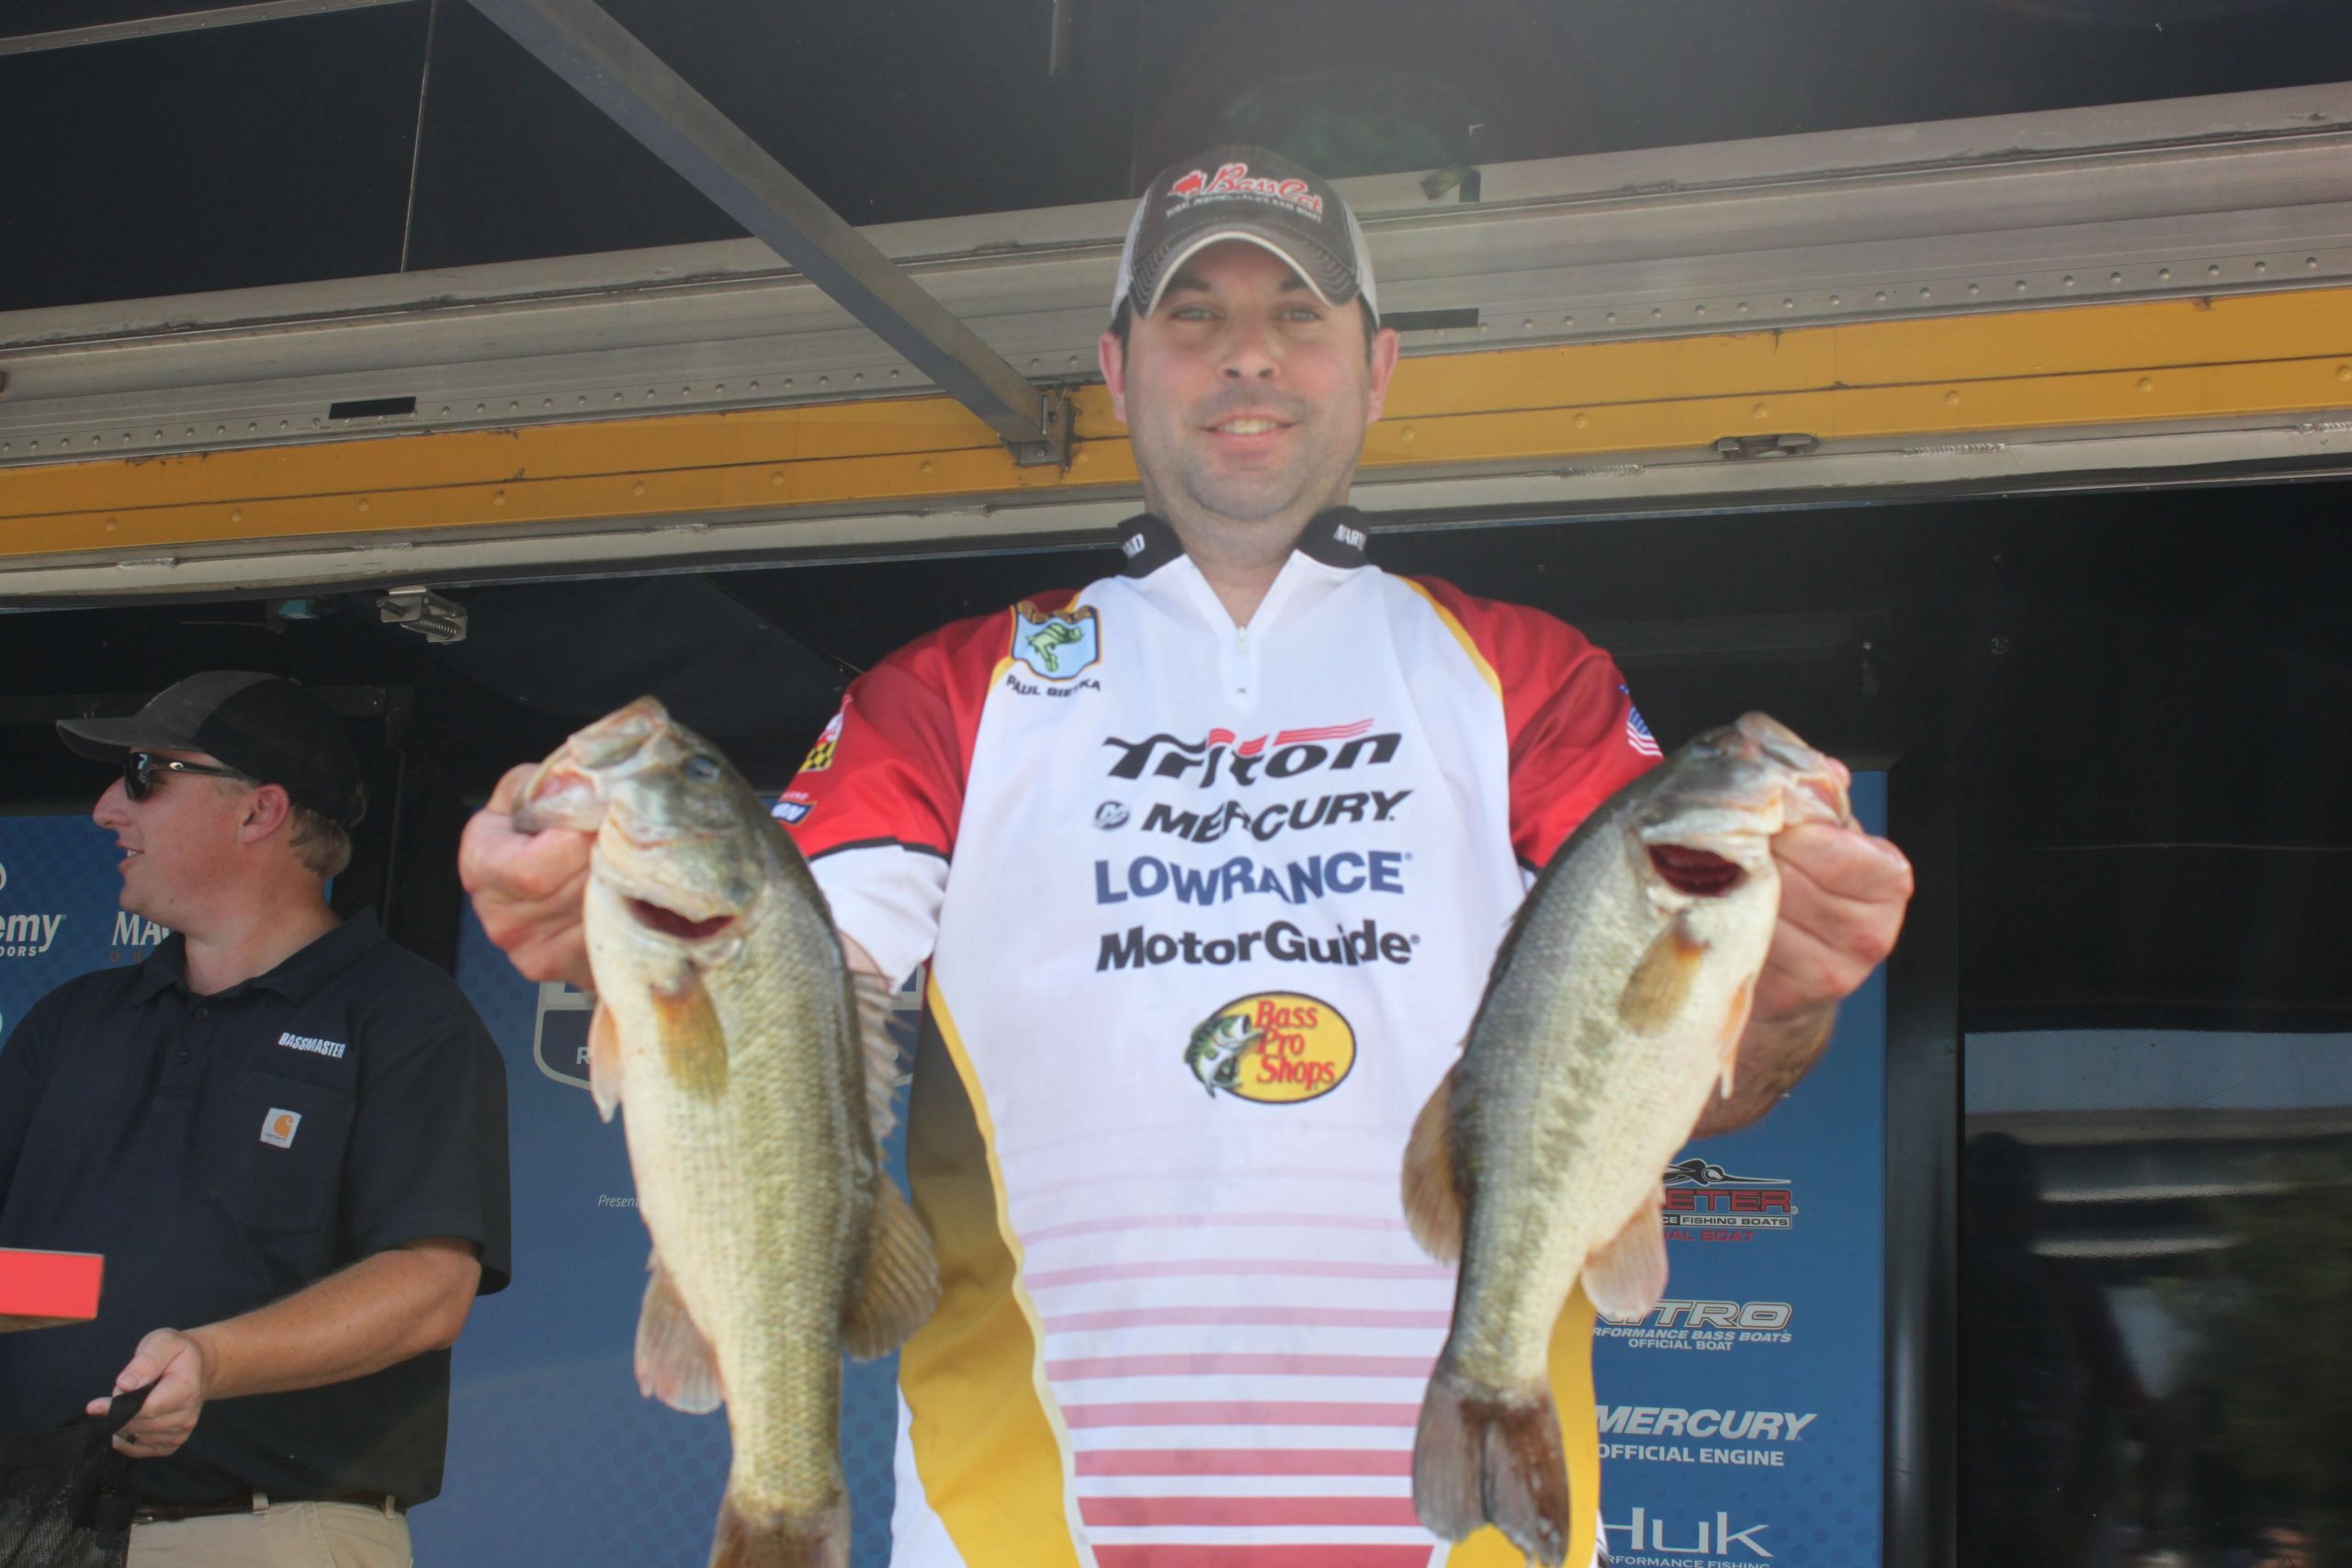 Paul Gietka of Maryland is in a tie for 11th place among boaters with 9-3.